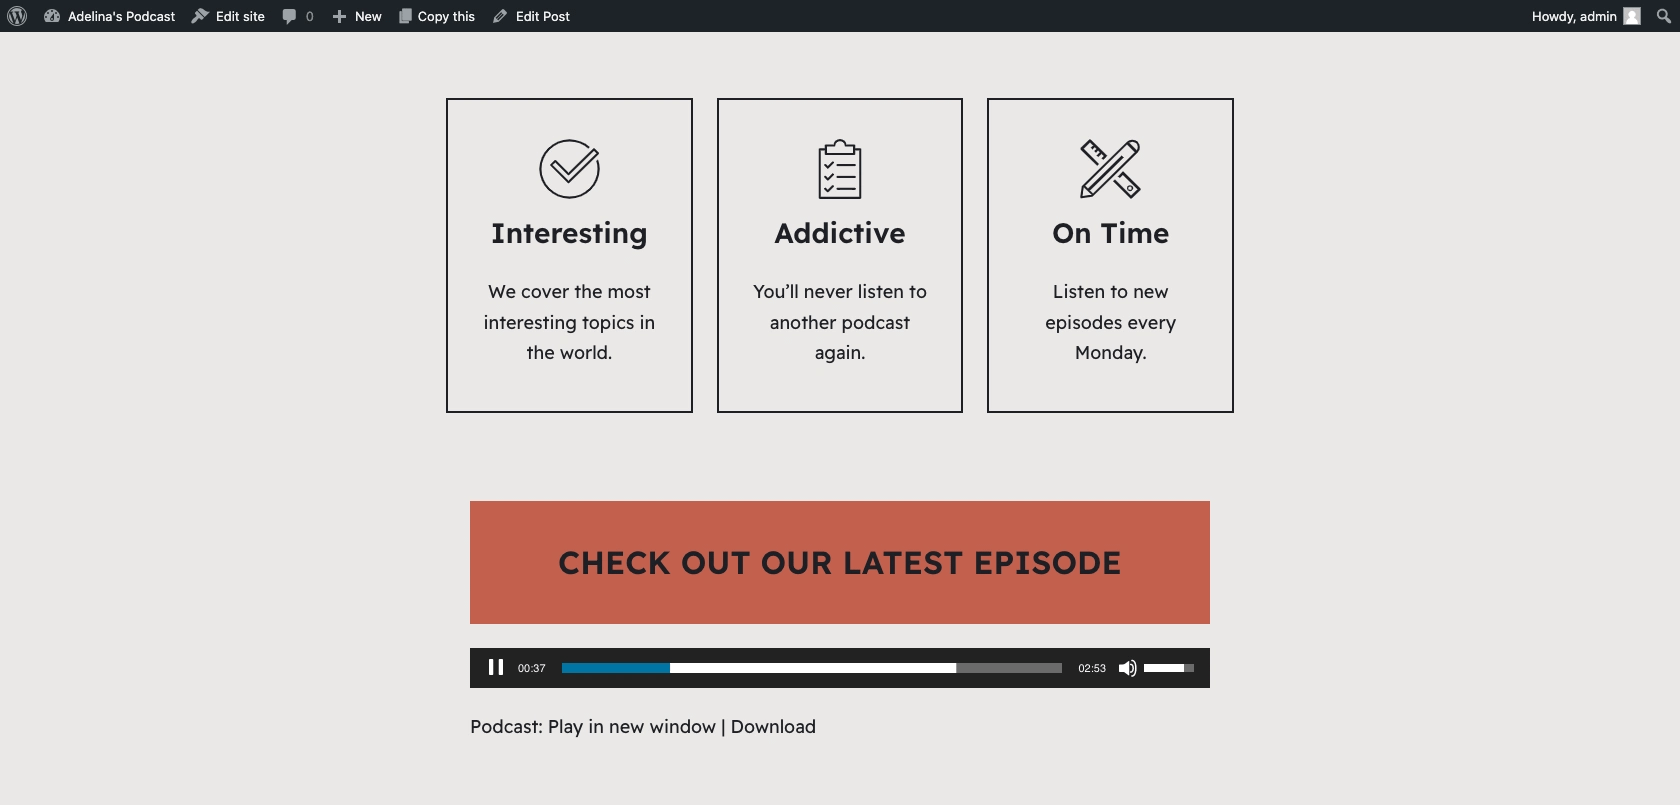 Preview what your podcast episode post will look like on the front end of your website